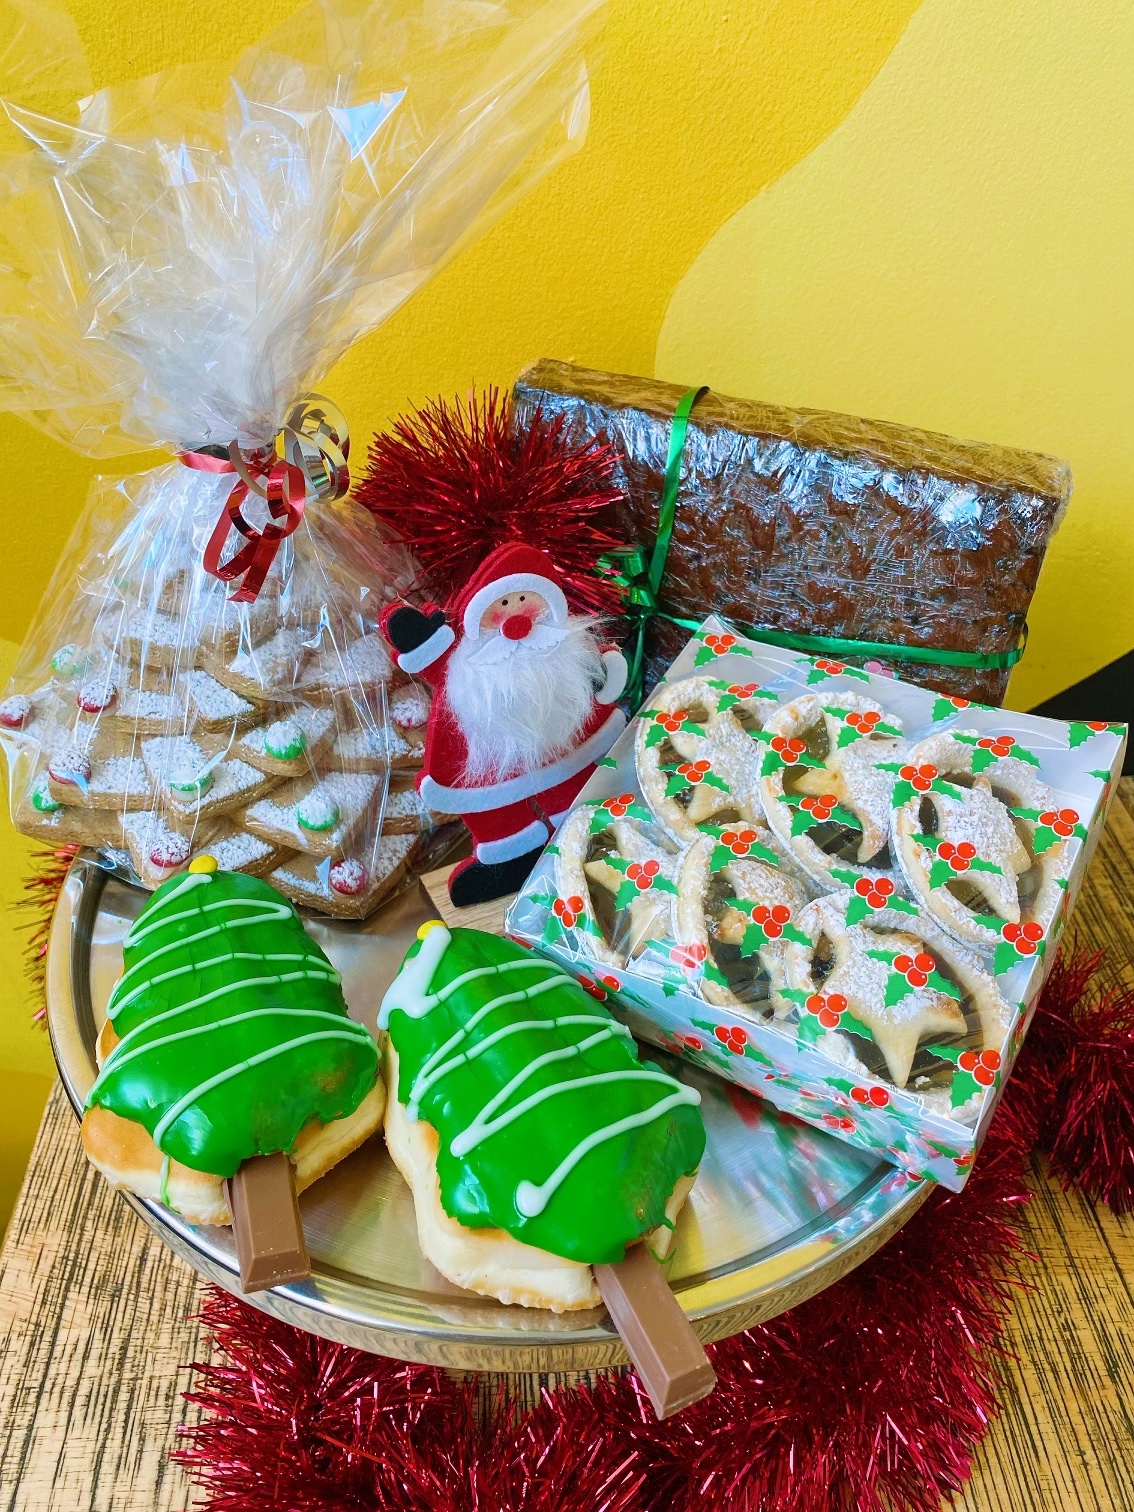 WIN one of four jam-packed Christmas Hampers from Banana Boogie Bakery!